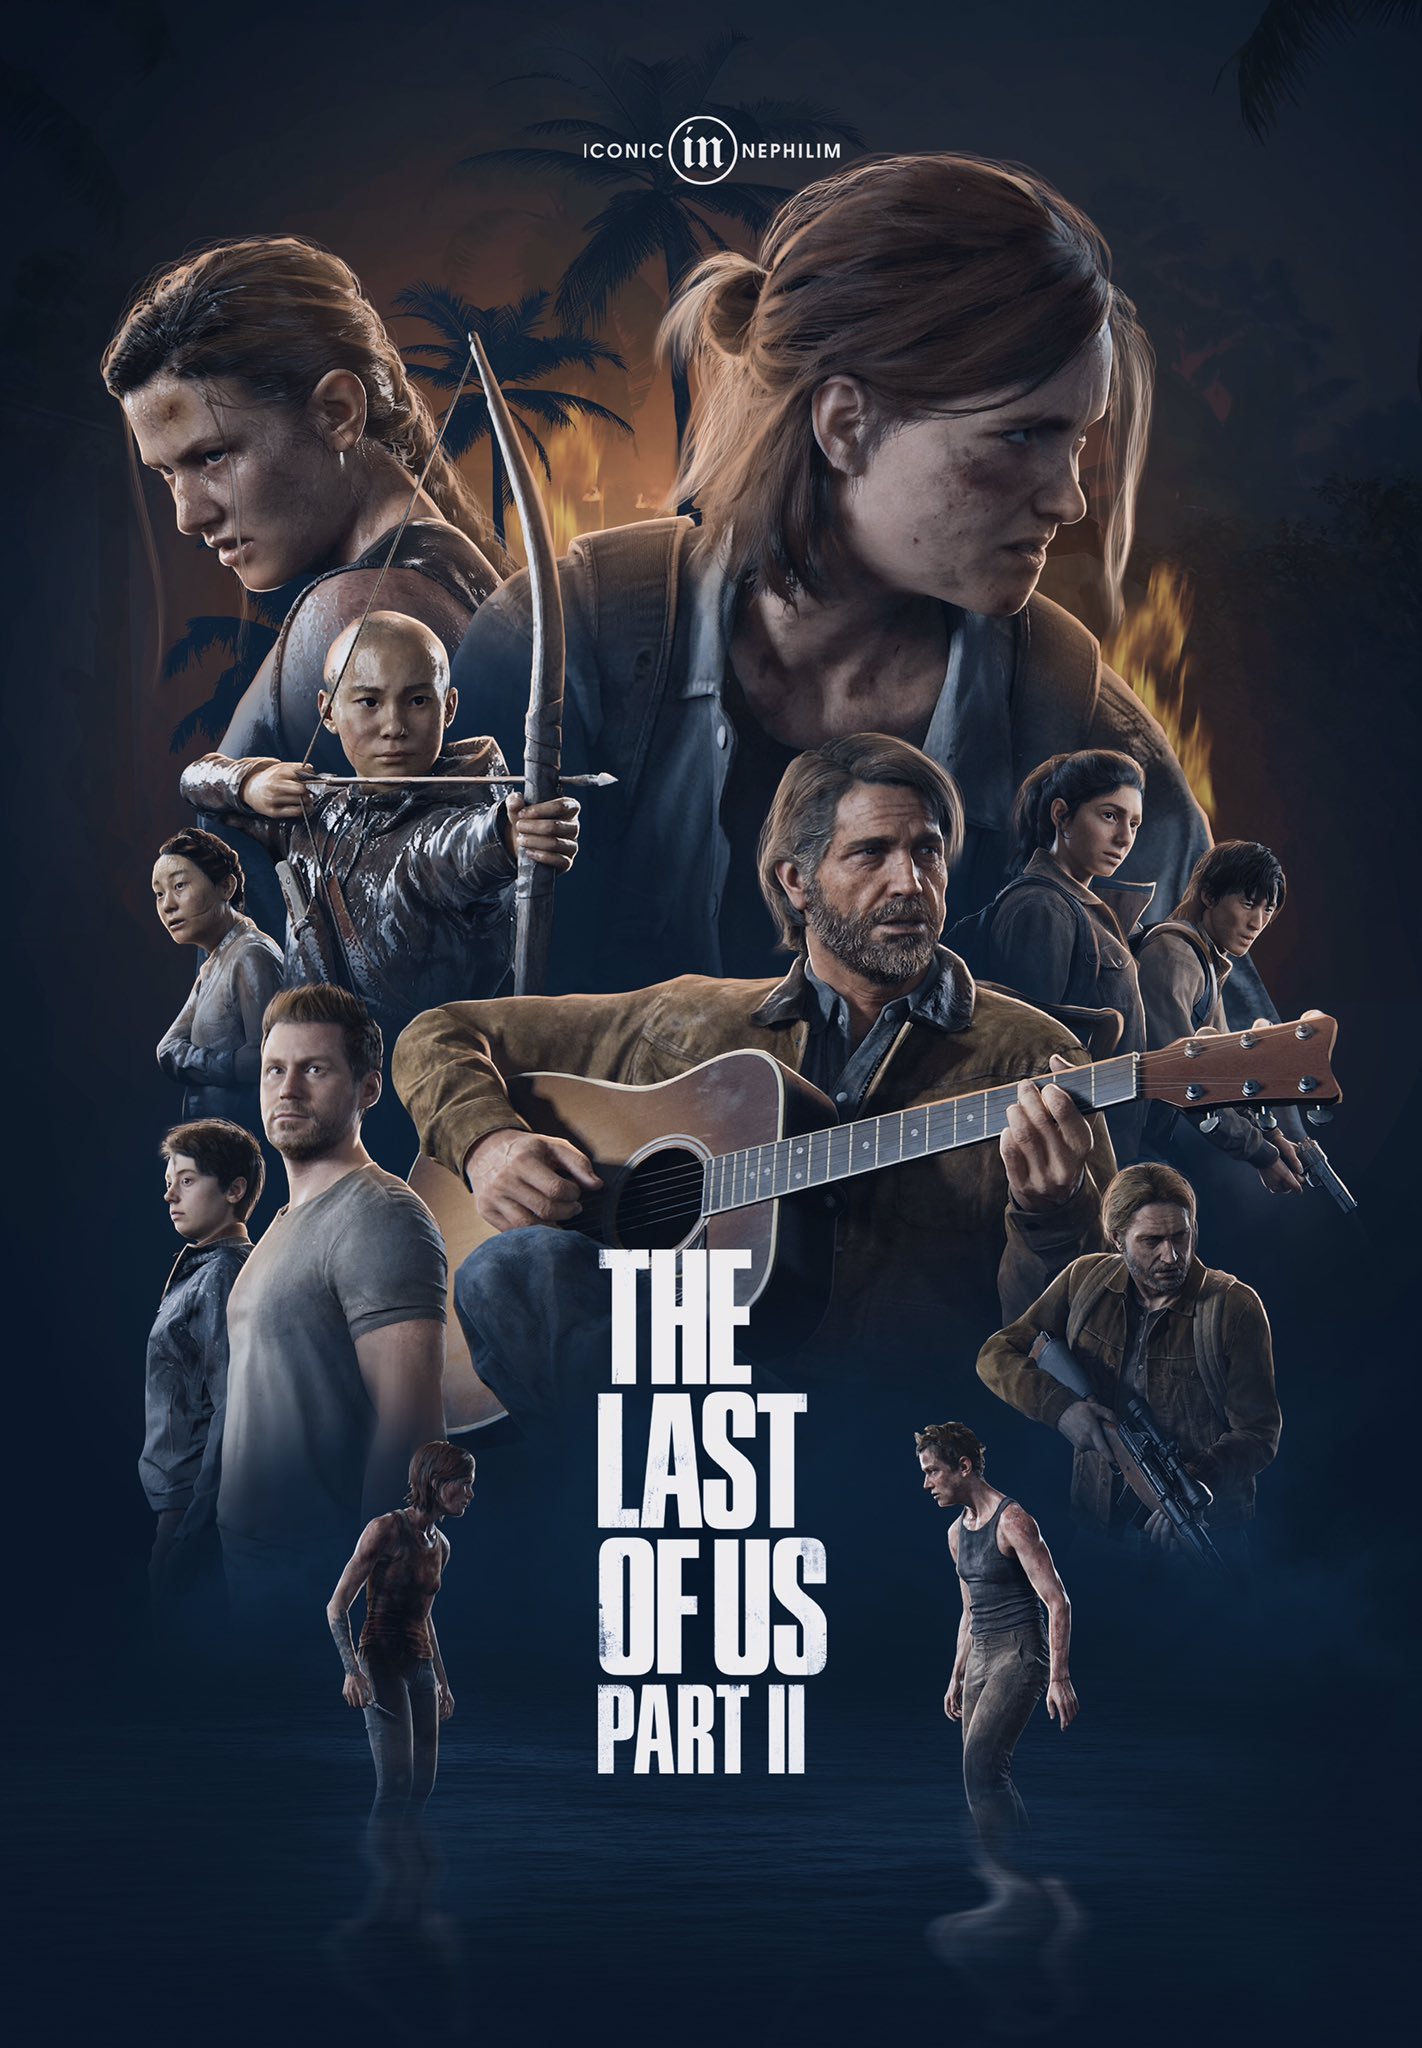 The Last of Us movie will cut a lot of content from the game